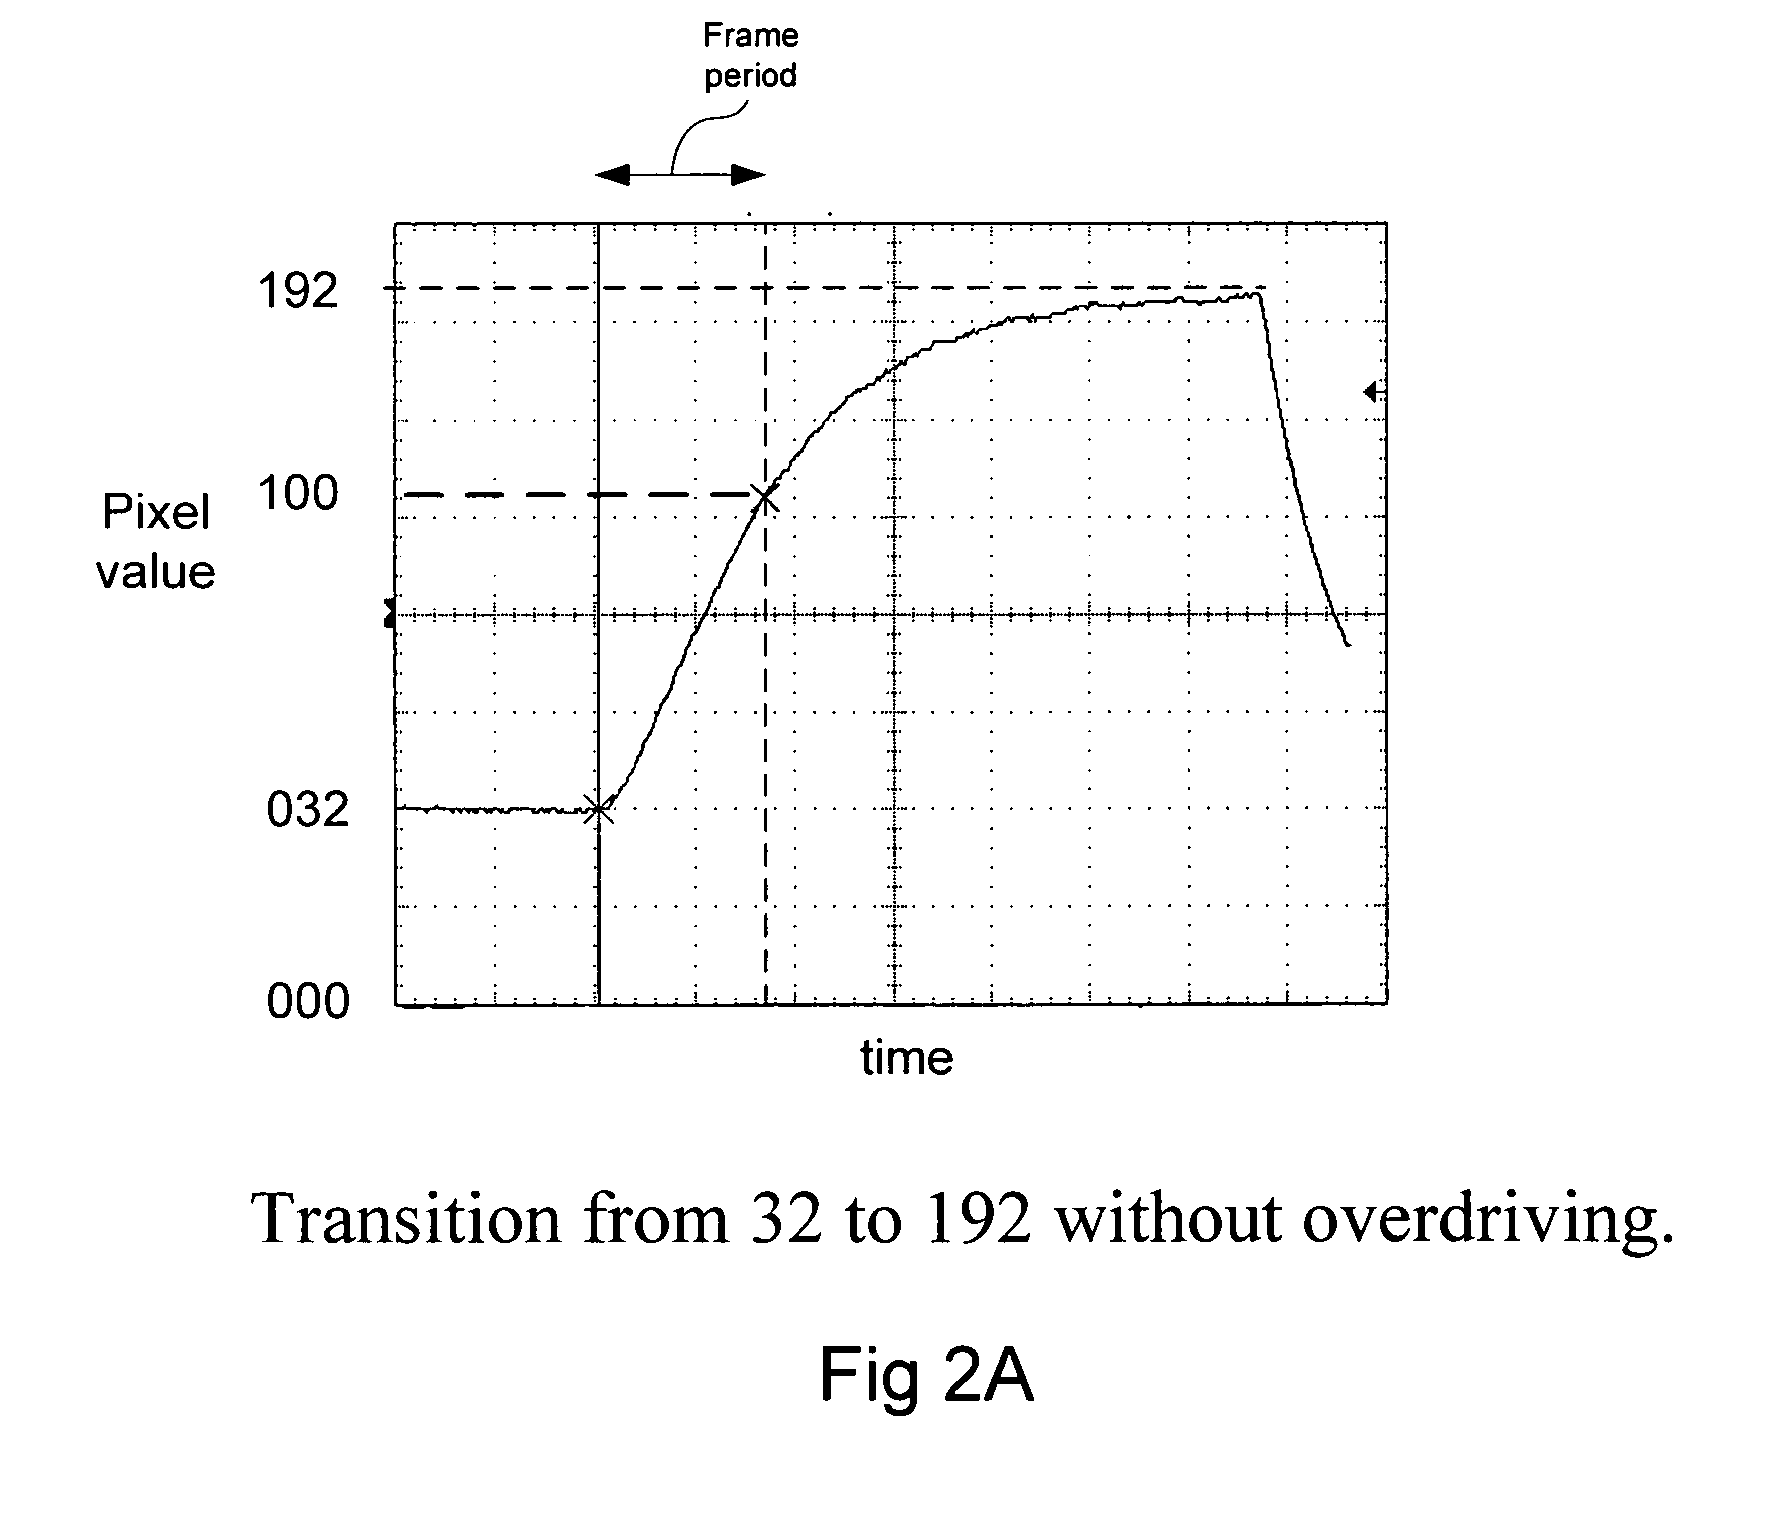 Extended overdrive table and methods of use thereof for enhancing the appearance of motion on an LCD panel